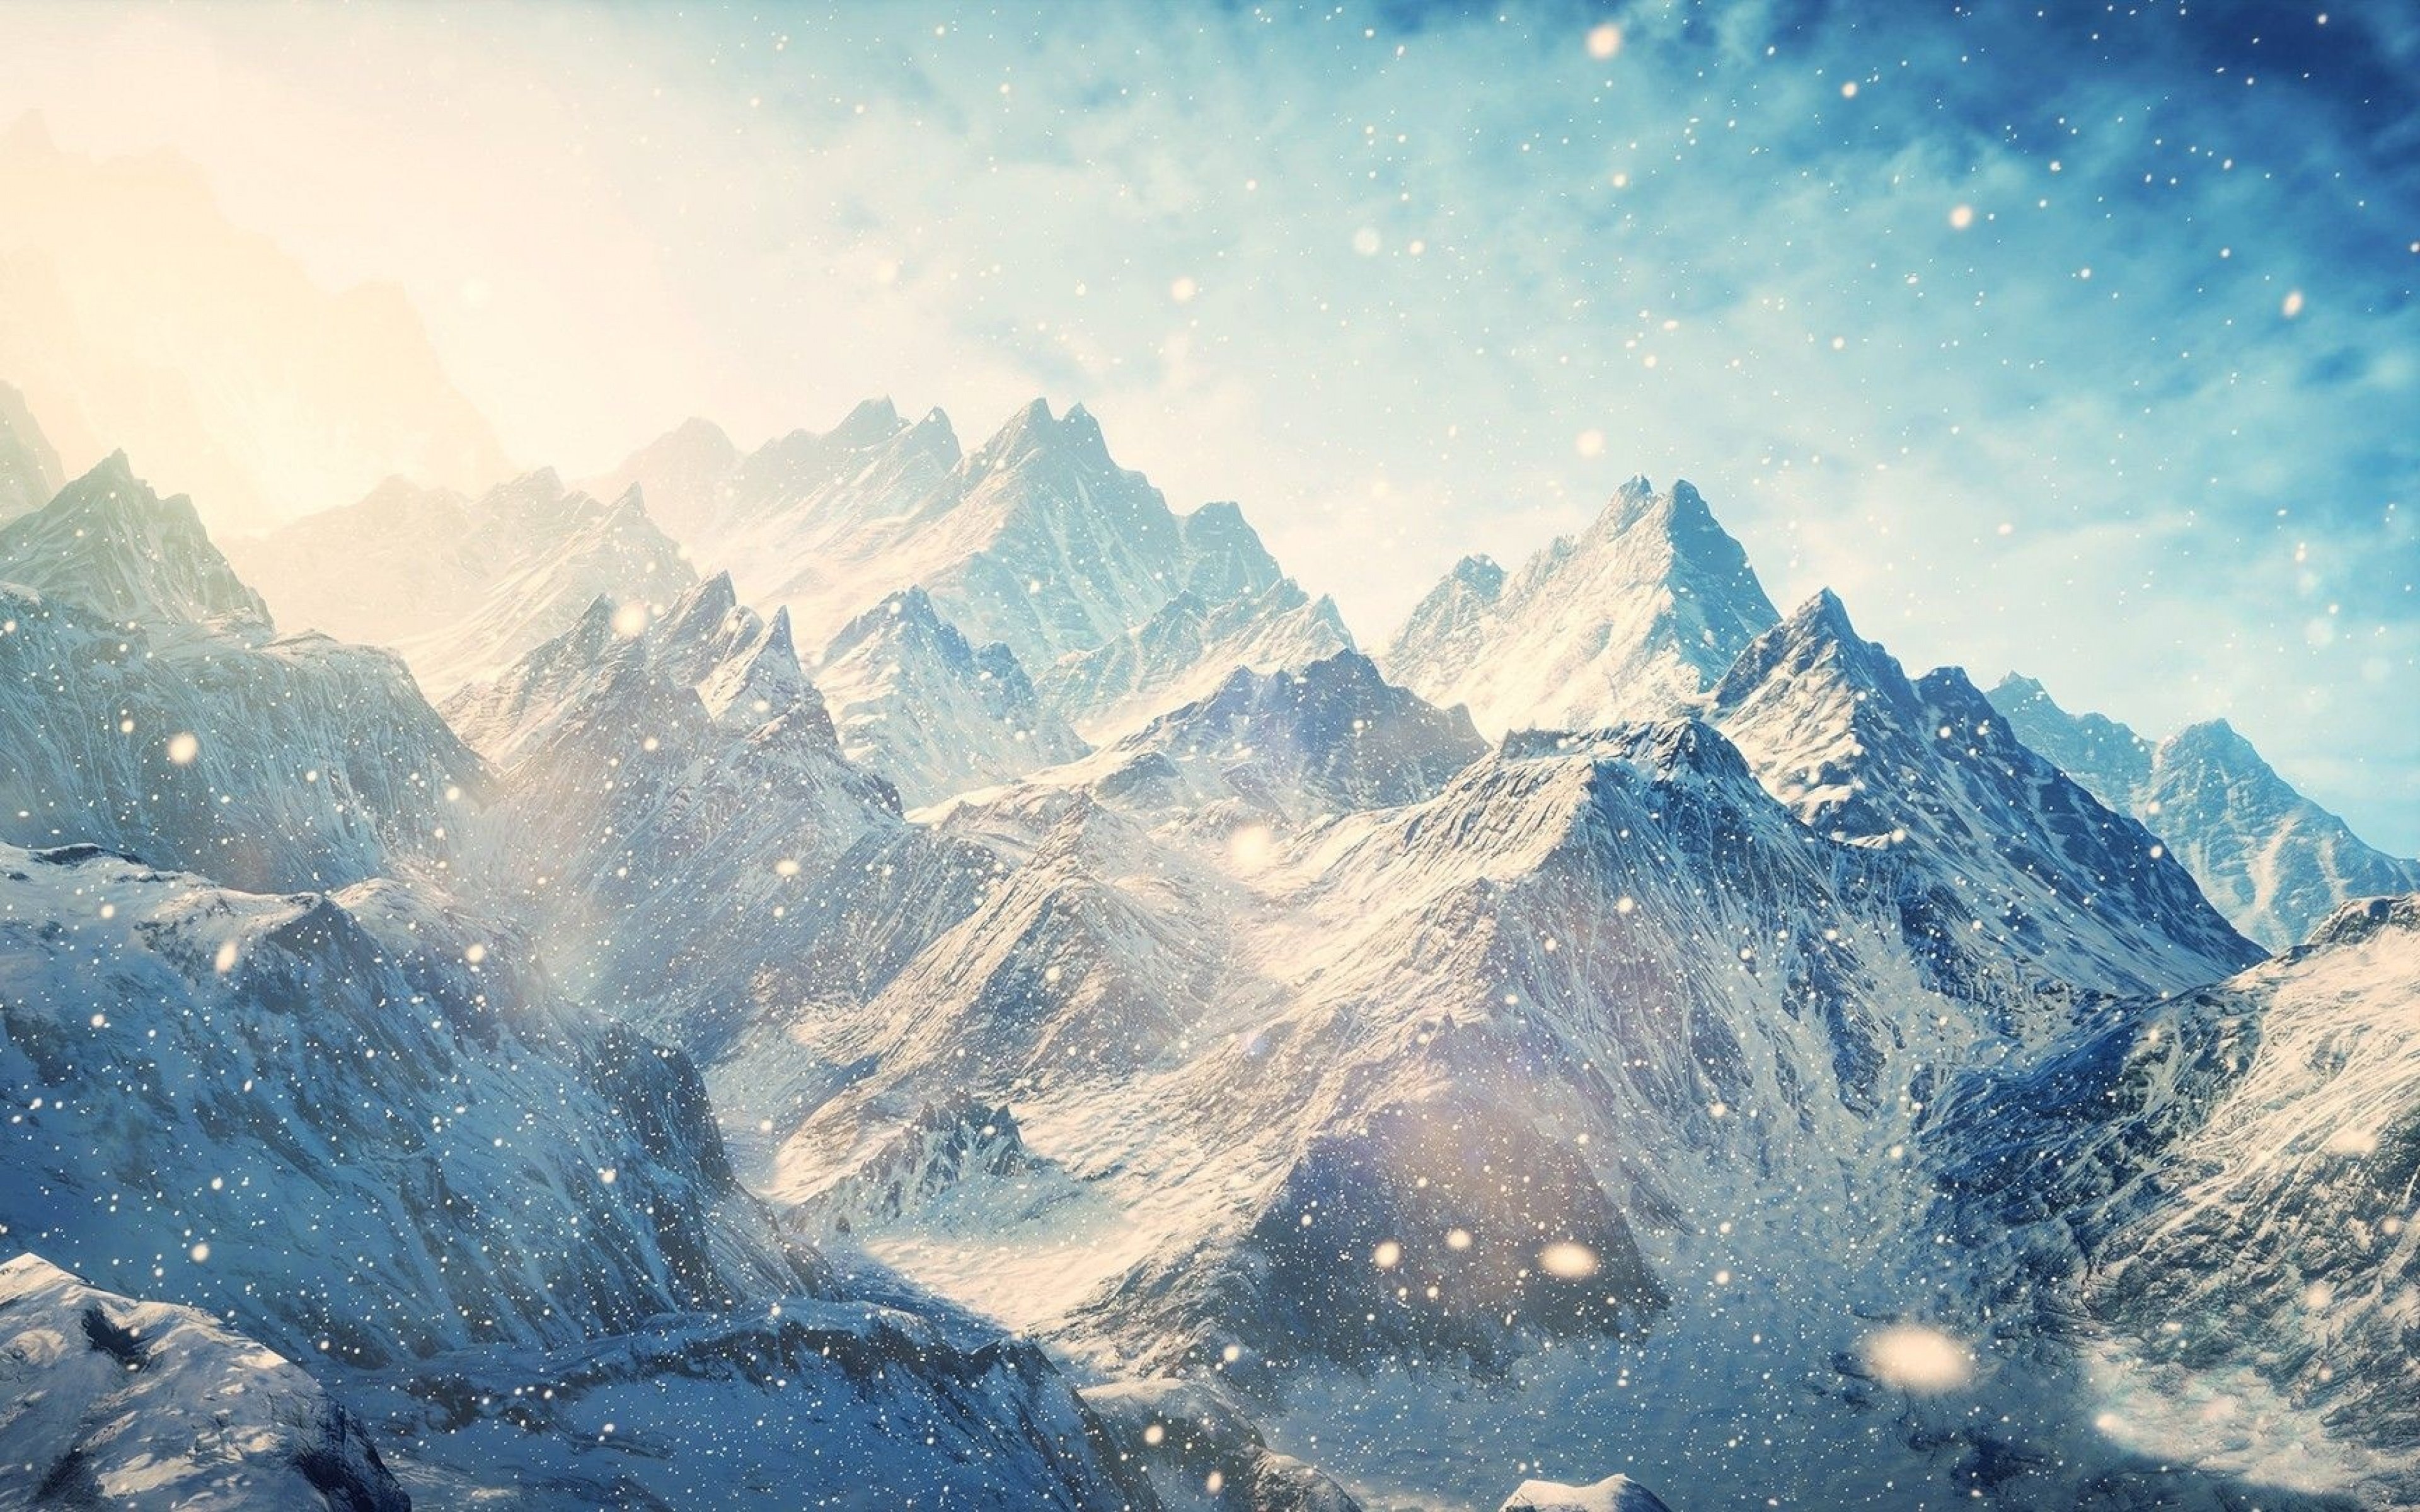 of mountains 4K wallpaper for your desktop or mobile